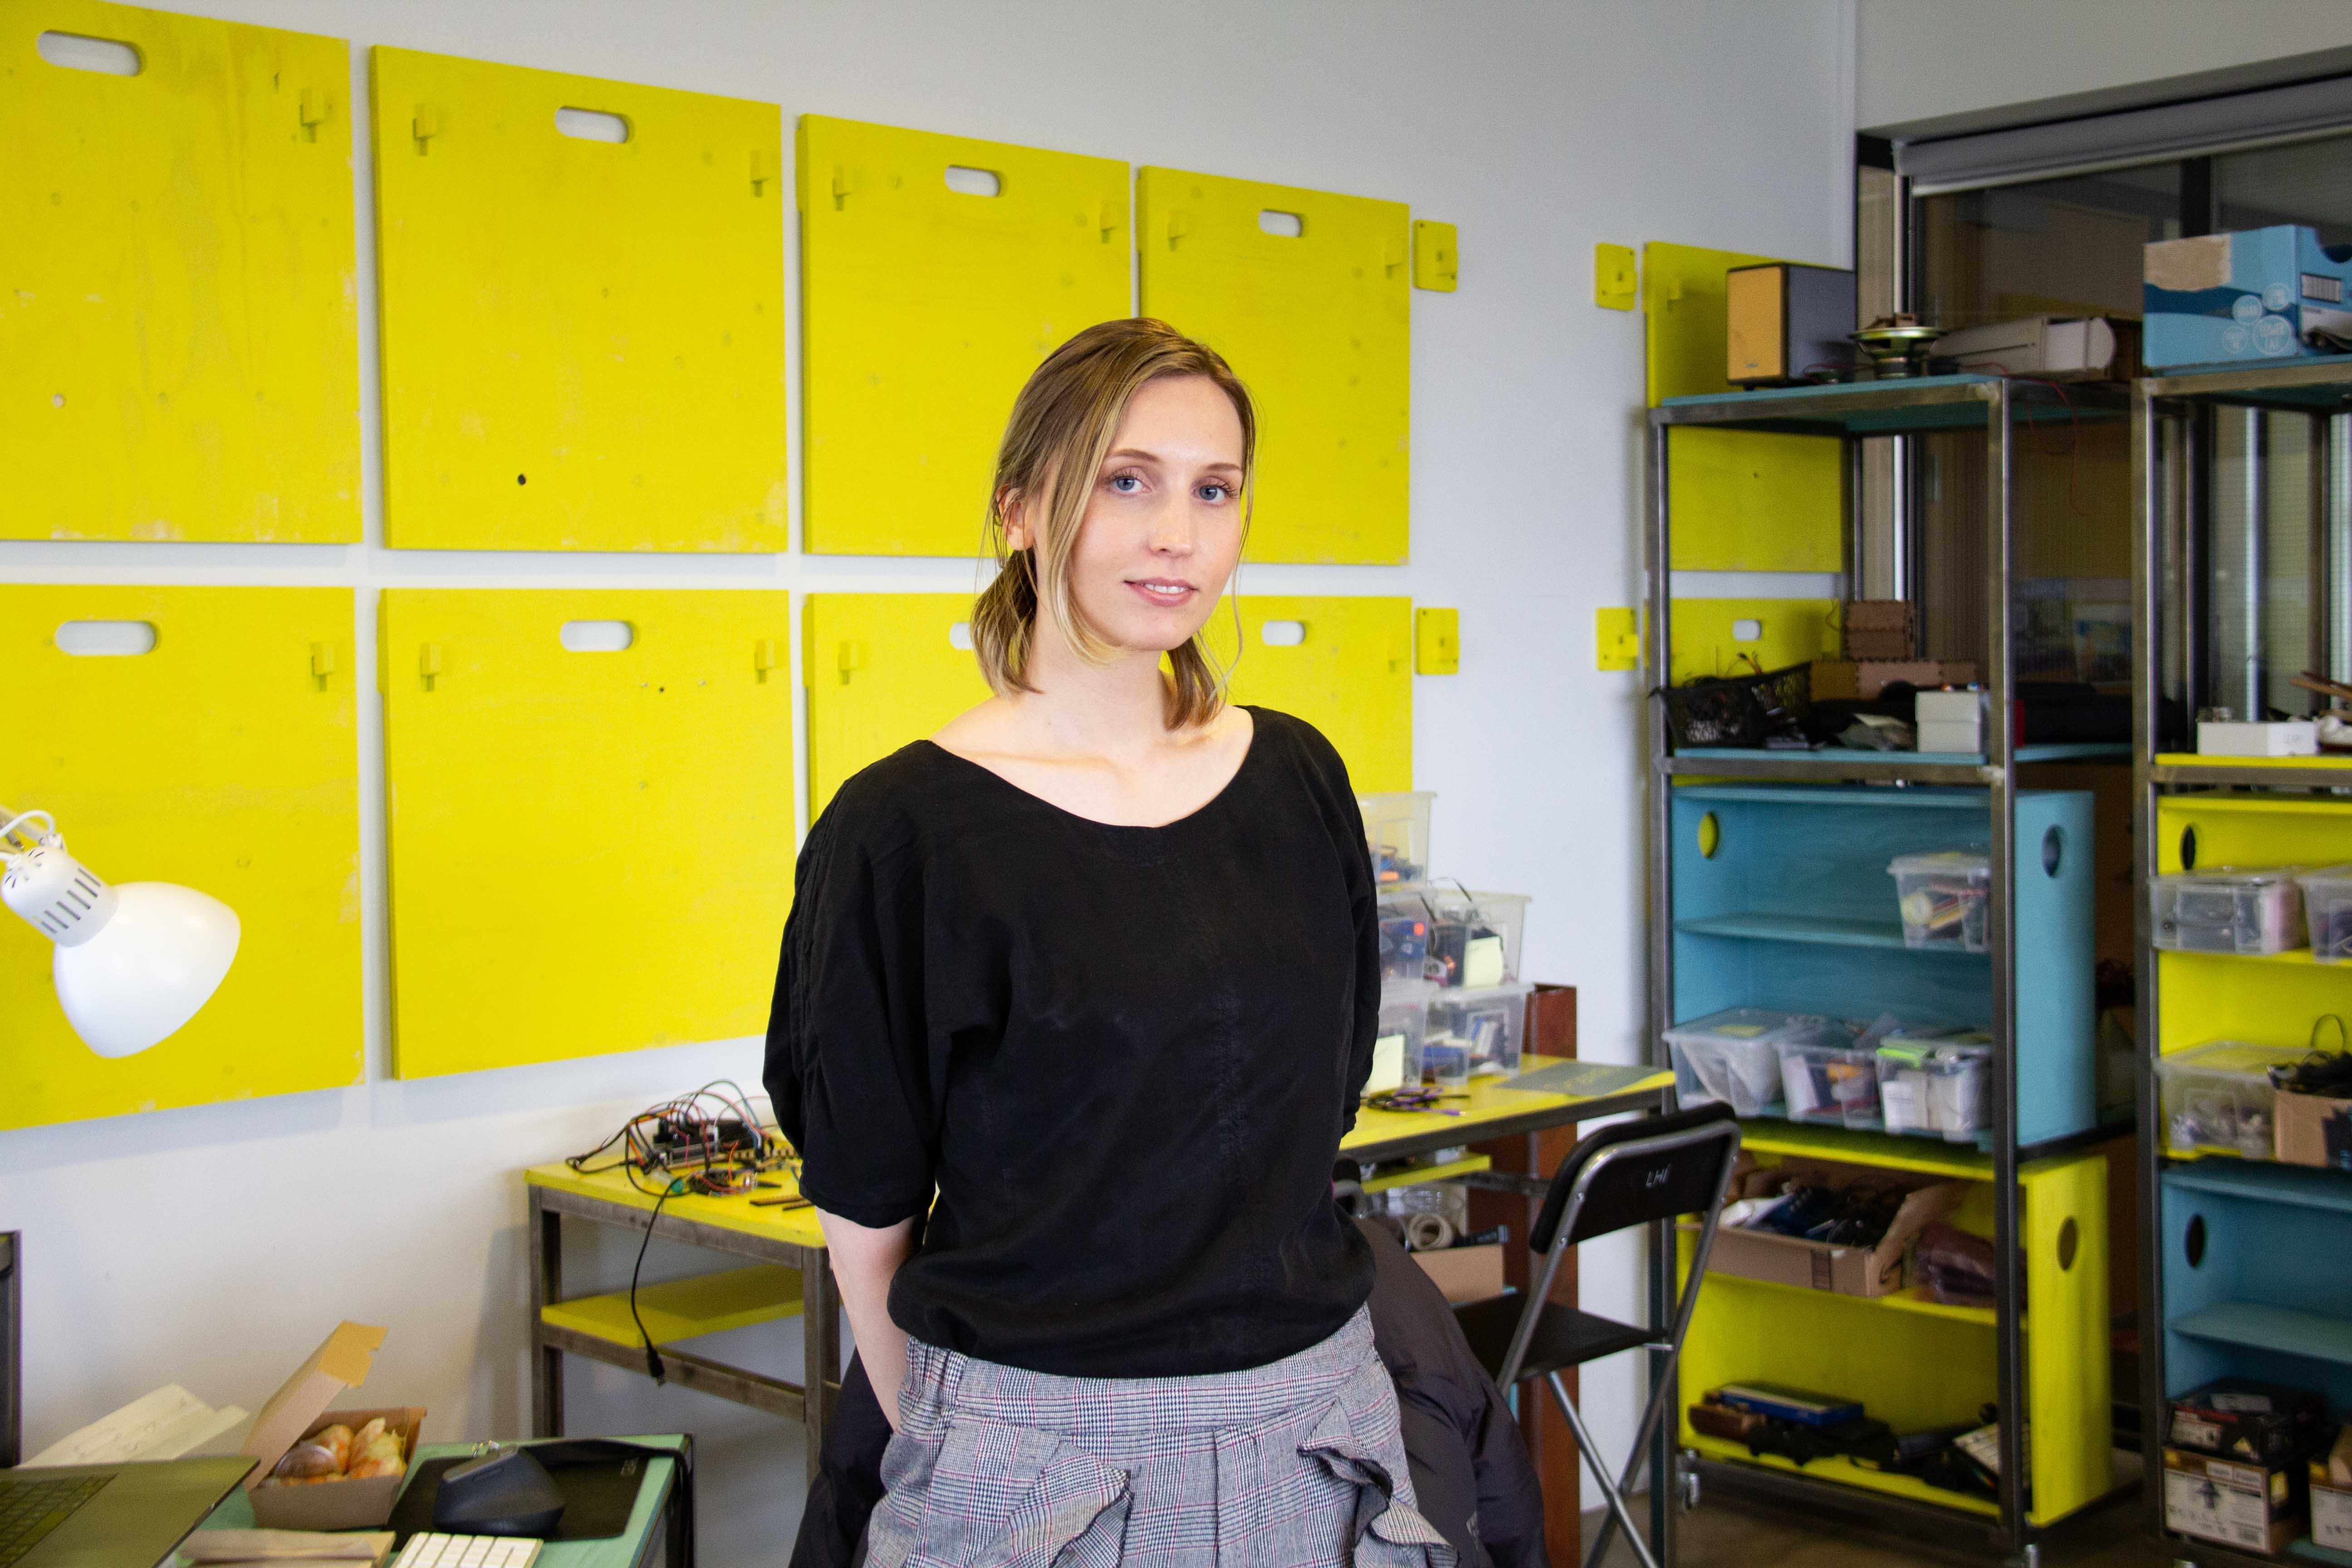 A young woman standing in front of a yellow and blue shelving system